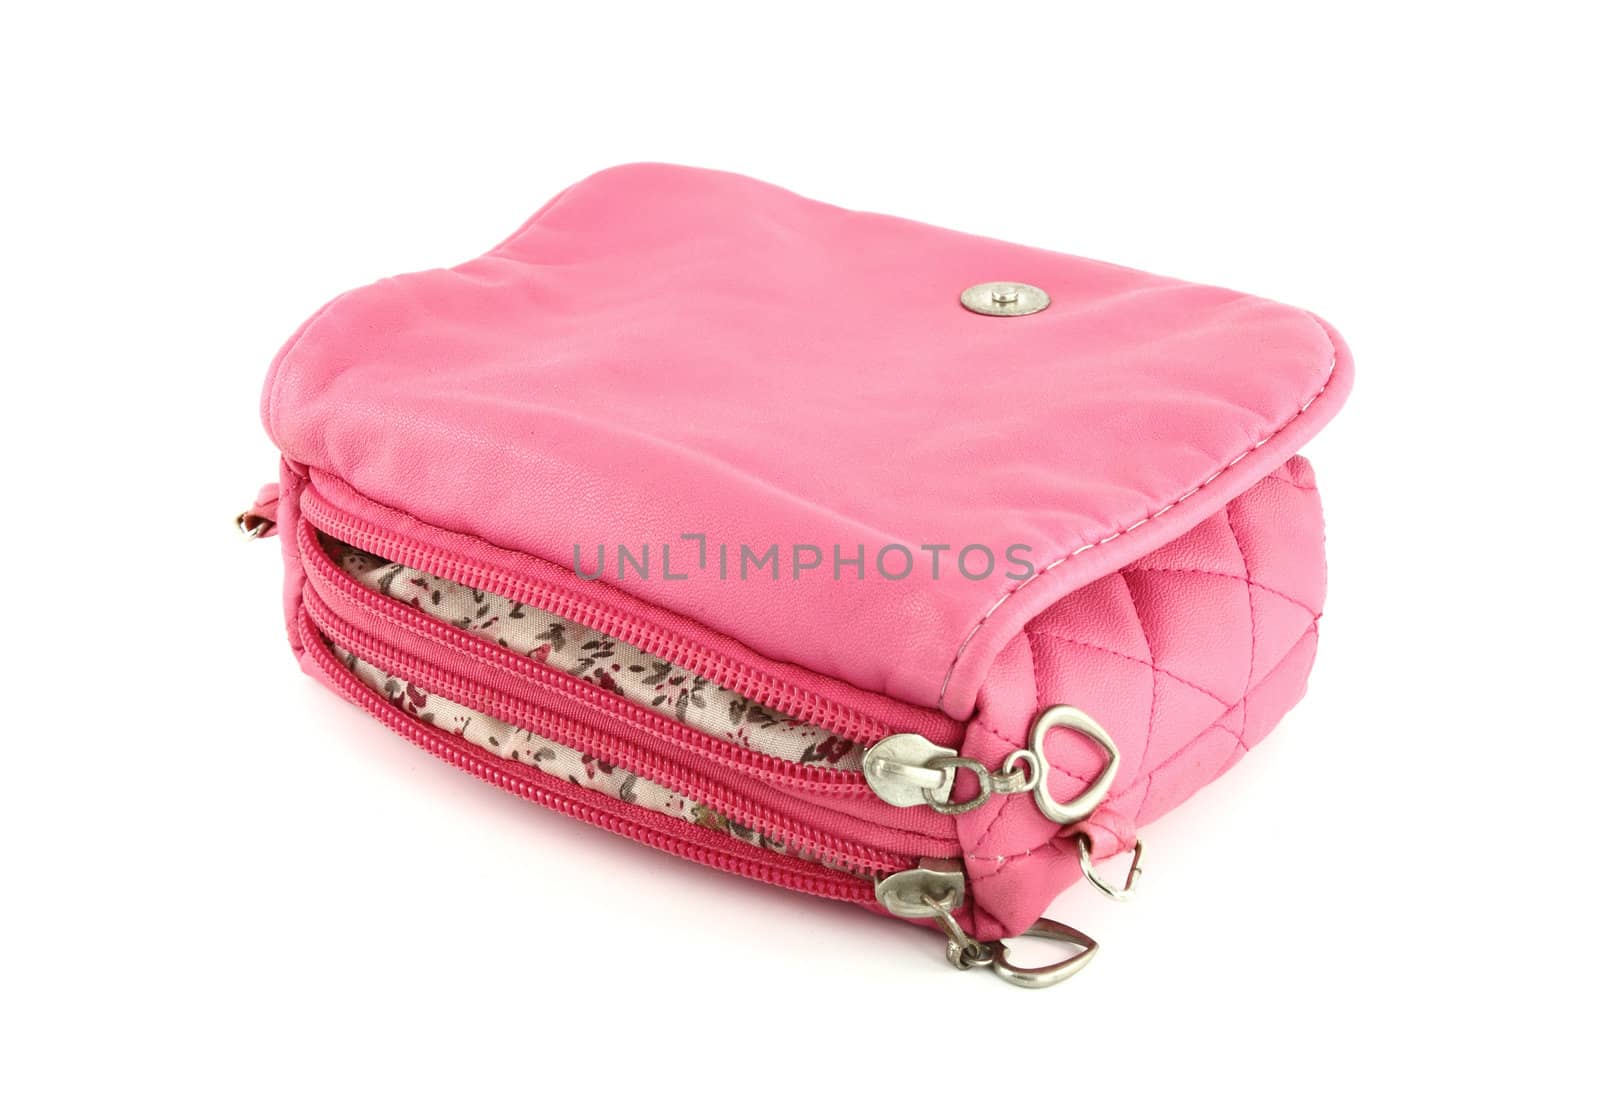 Glamour purse isolated on white background by geargodz